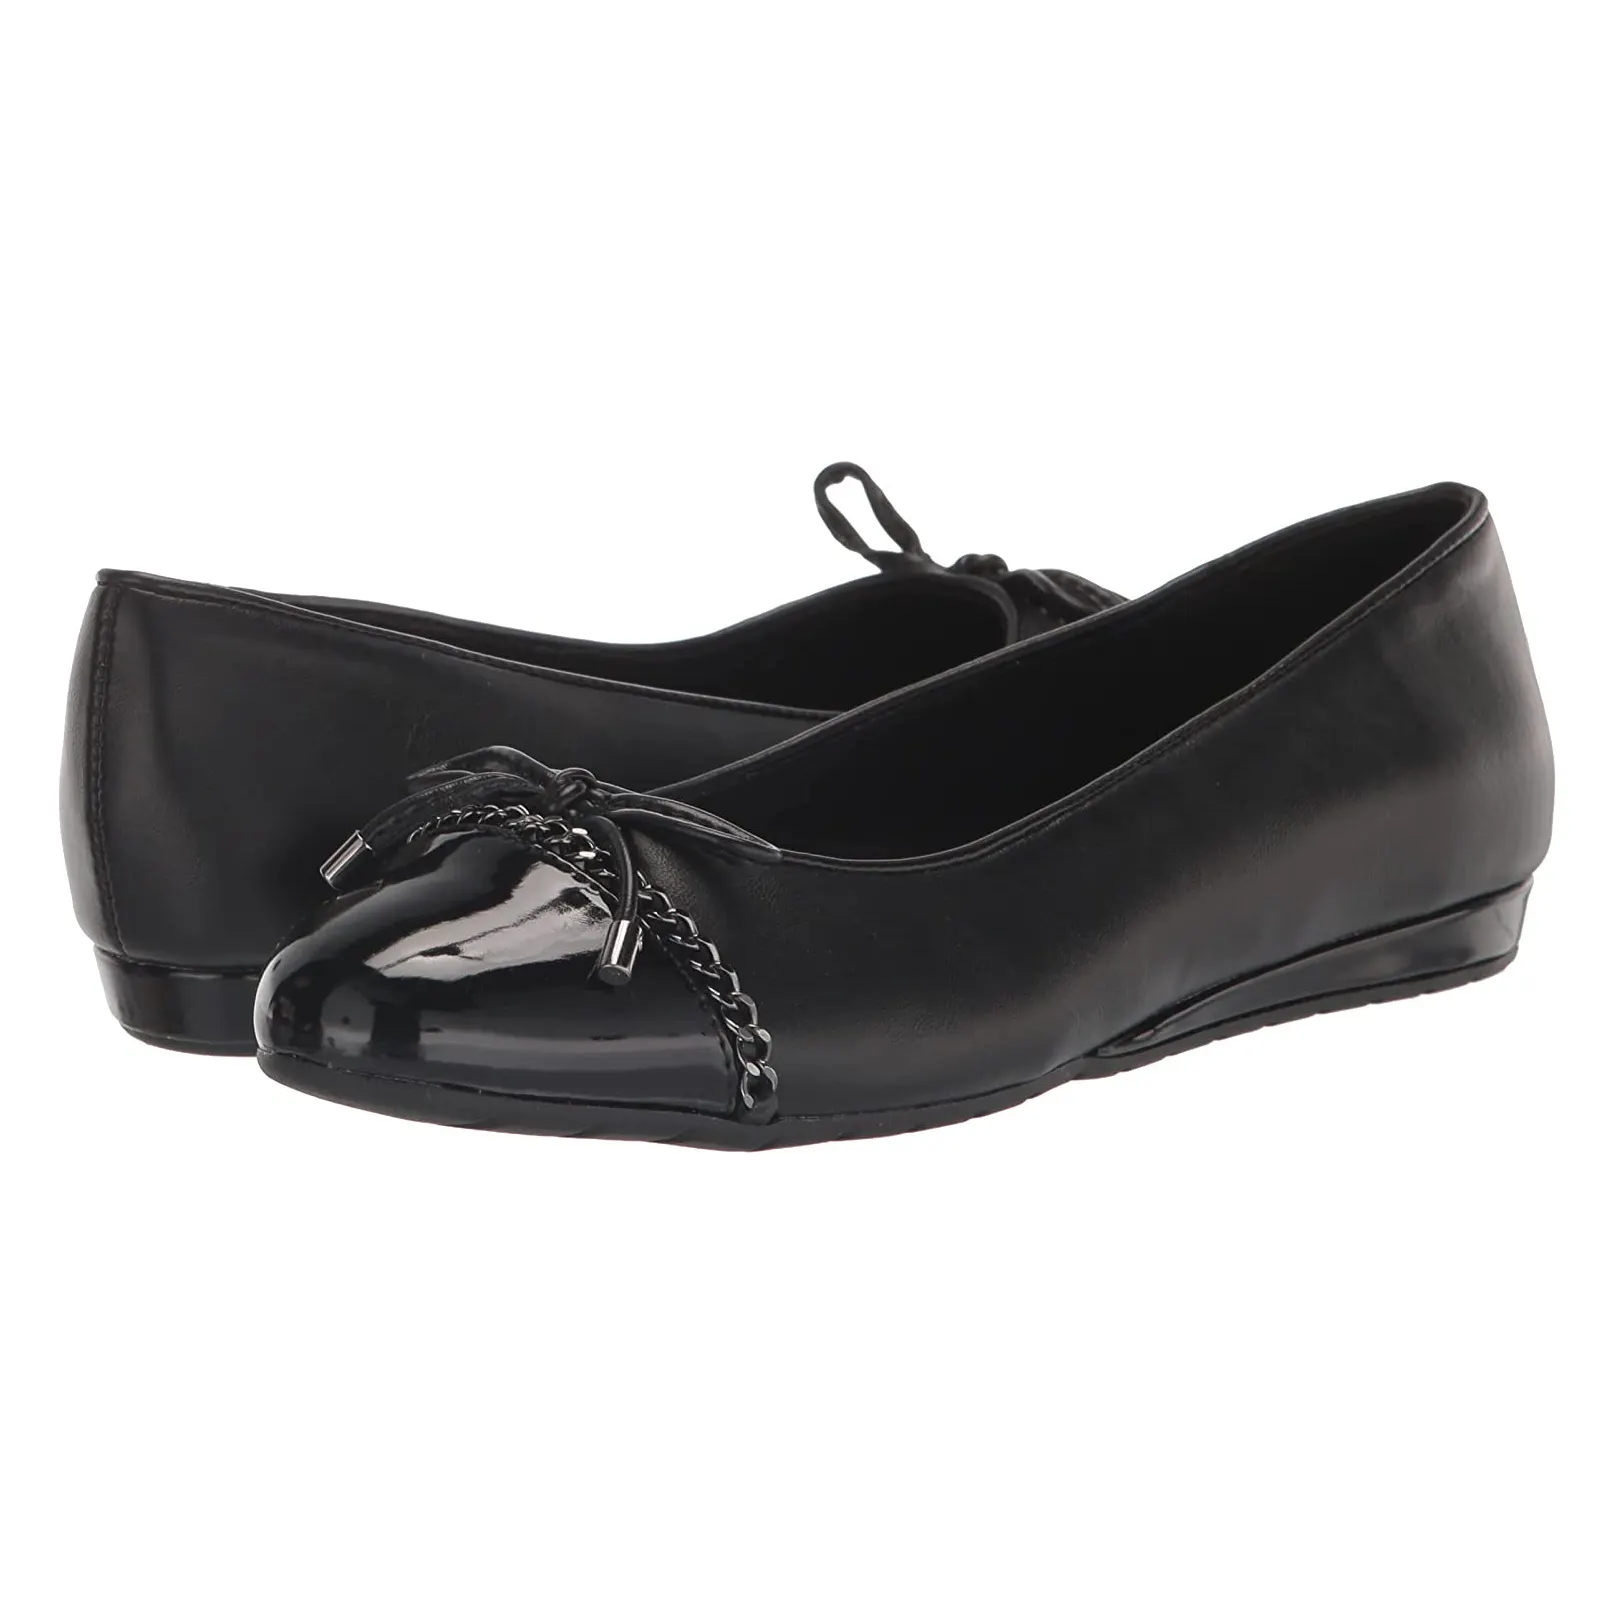 Best leather flats